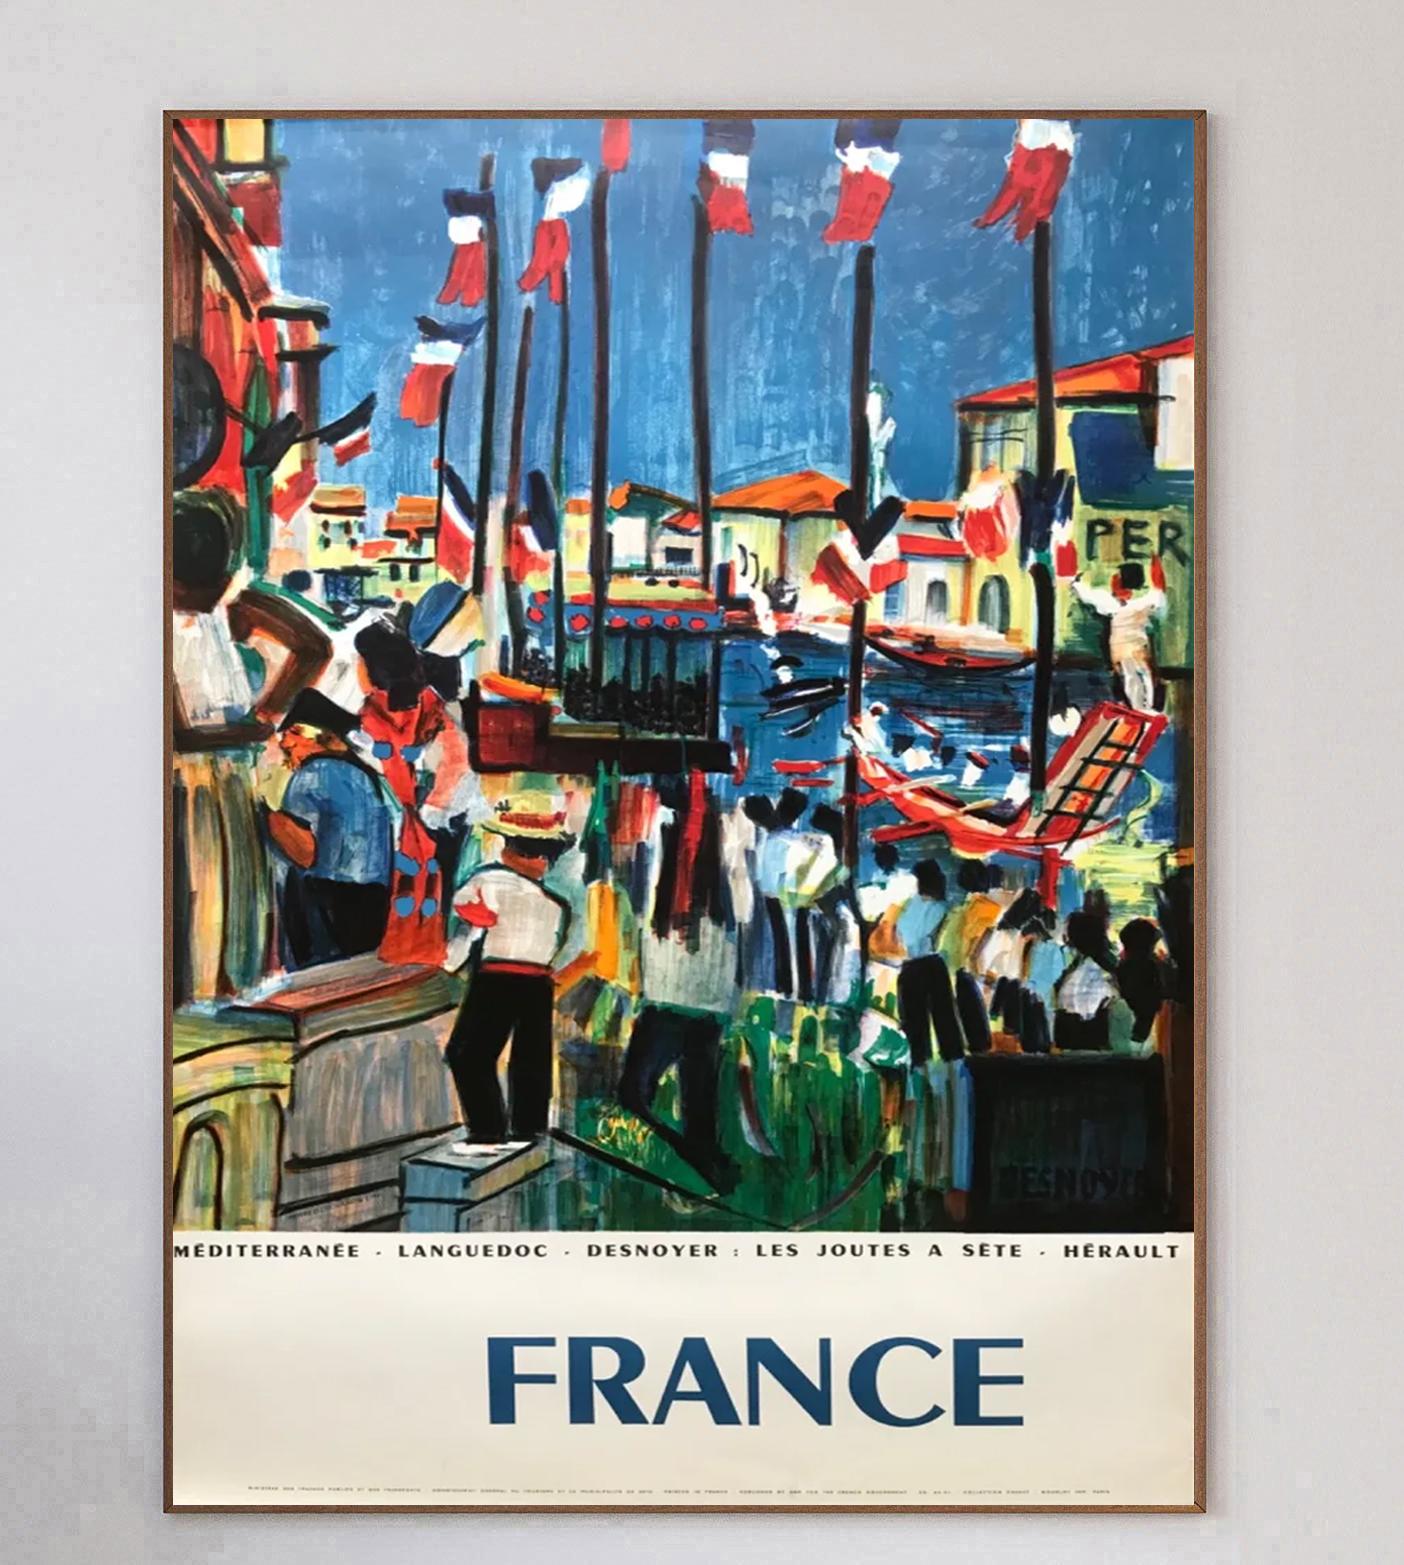 Featuring beautiful artwork from the French painter Francois Desnoyer, depicting the celebrations on the streets and river celebrating France on what is presumably Bastille Day. The vibrant design strongly features the red white and blue national